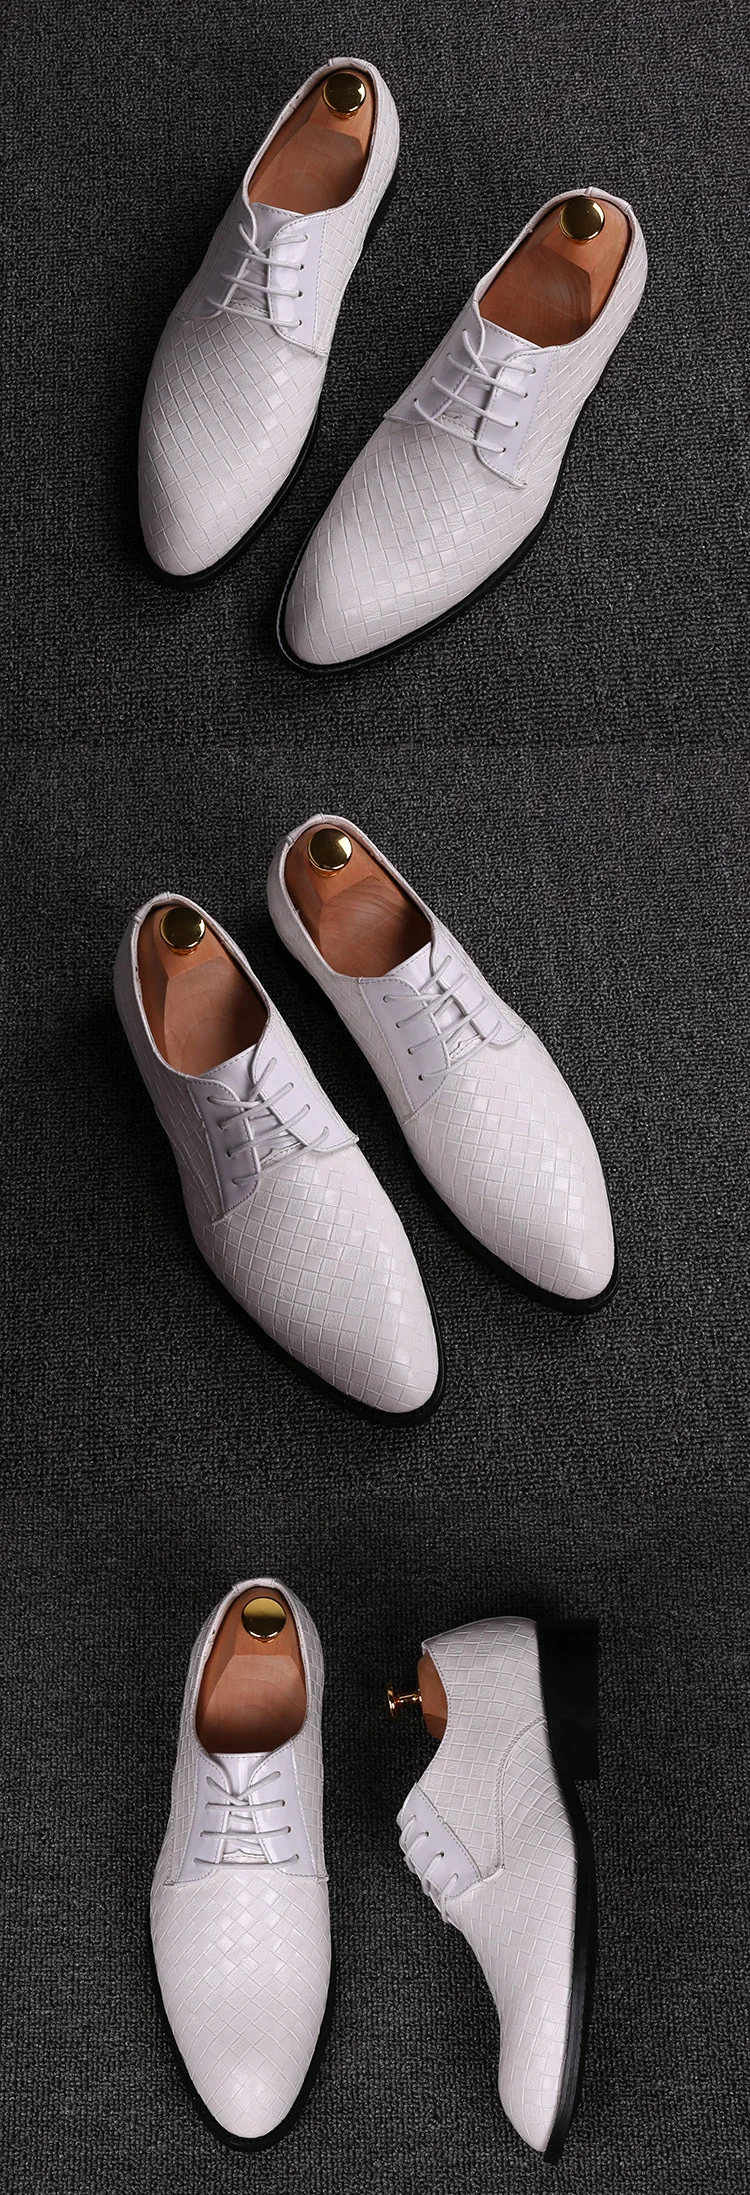 2020 Formal Leather Shoes Men Dress Business Shoes Male Geometric Red Oxfords Party Wedding Casual Men's Flats Chaussure Homme55